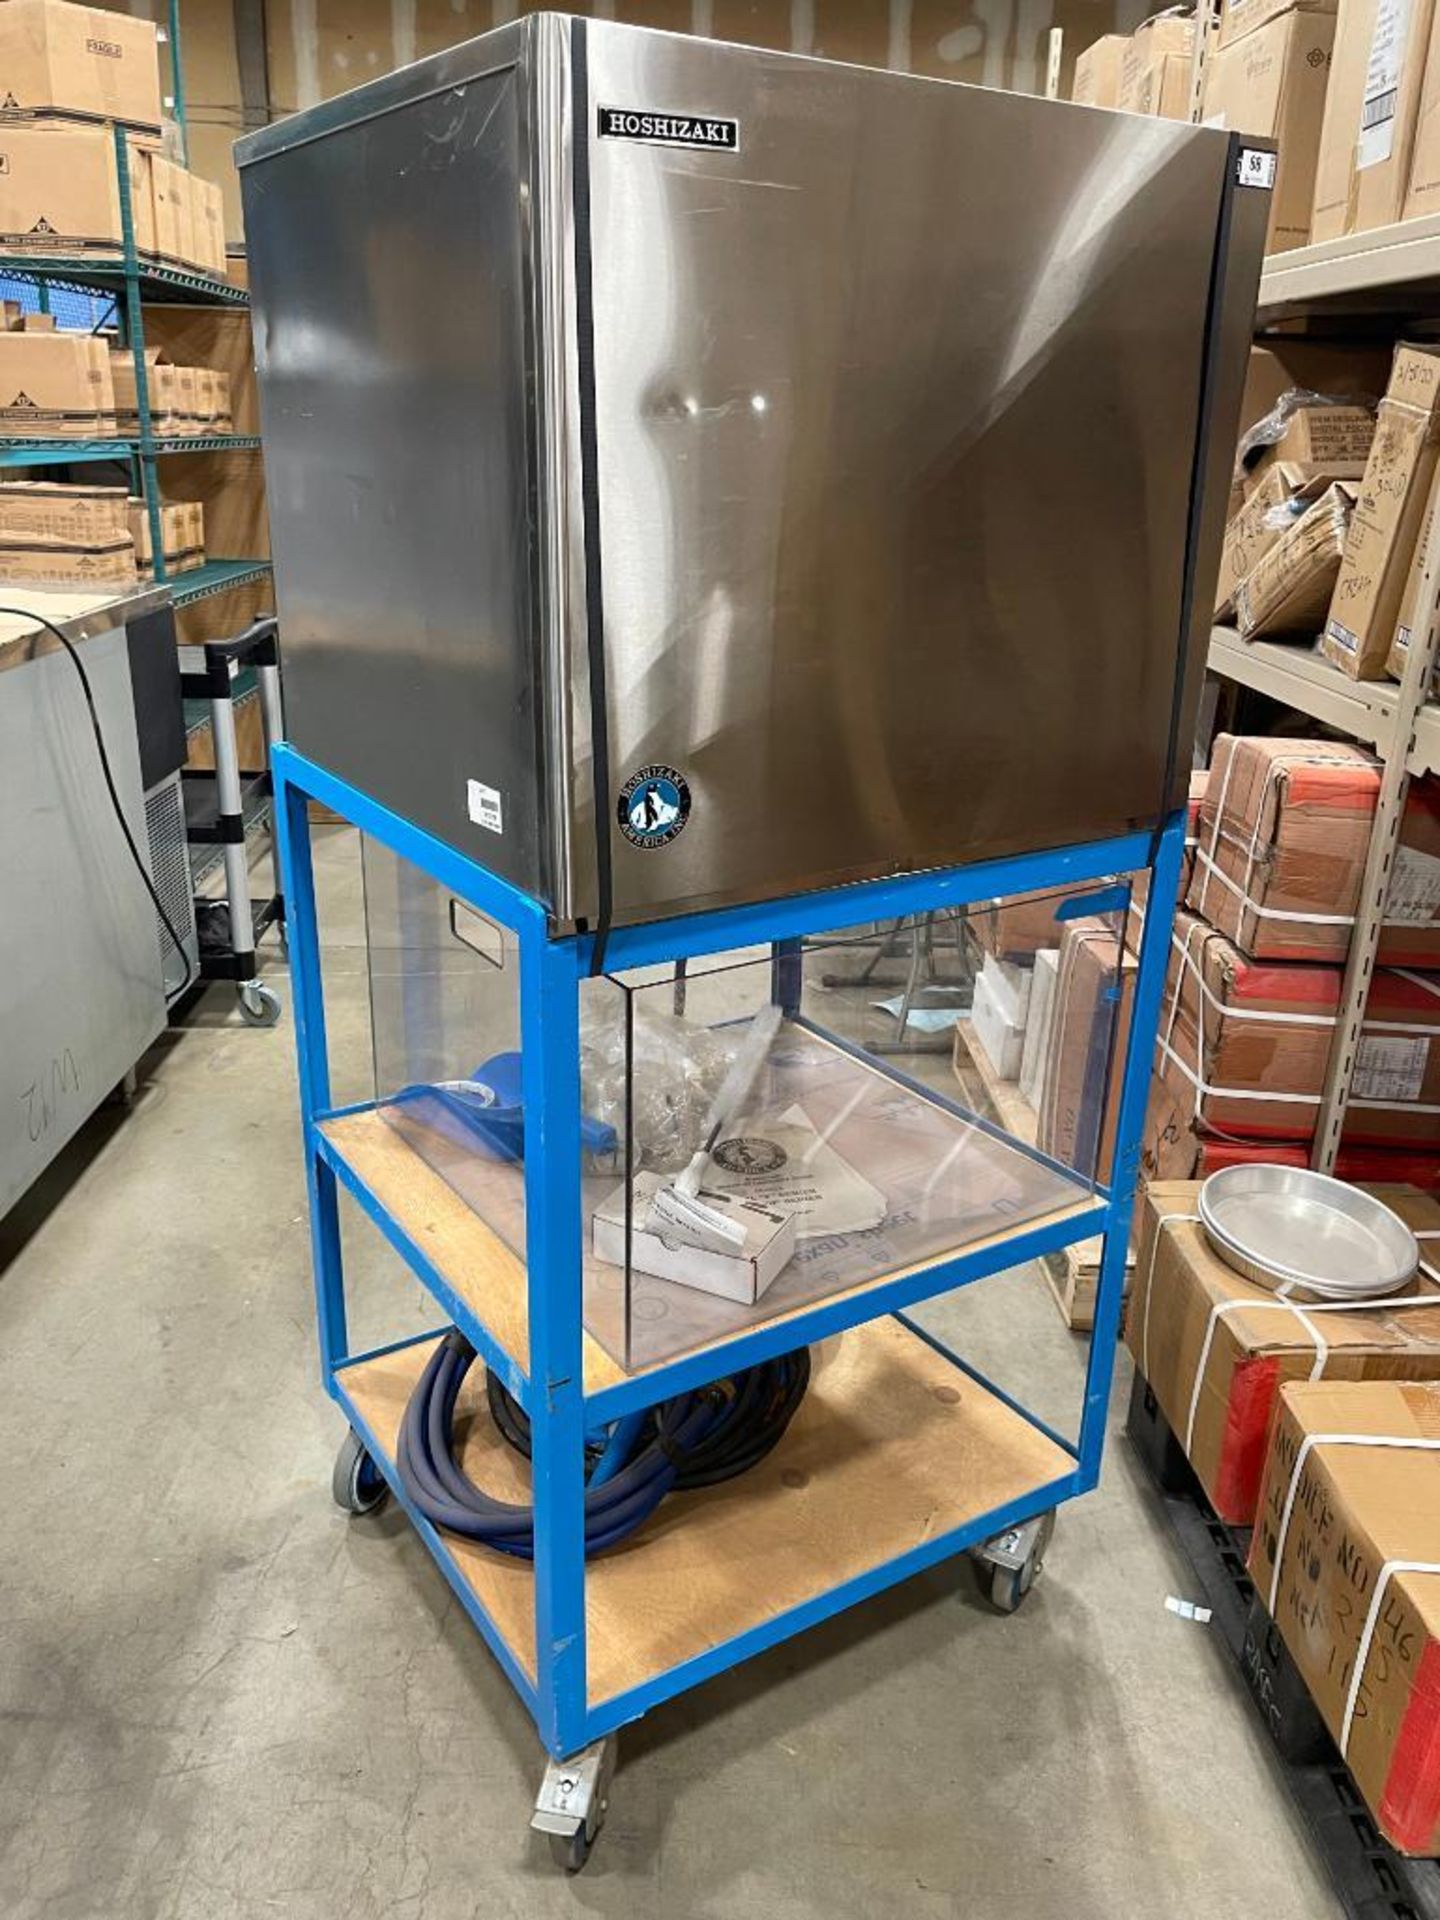 HOSHIZAKI KML-600MWH WATER COOLED 633 LBS/DAY ICE MACHINE WITH STEEL MOBILE CART